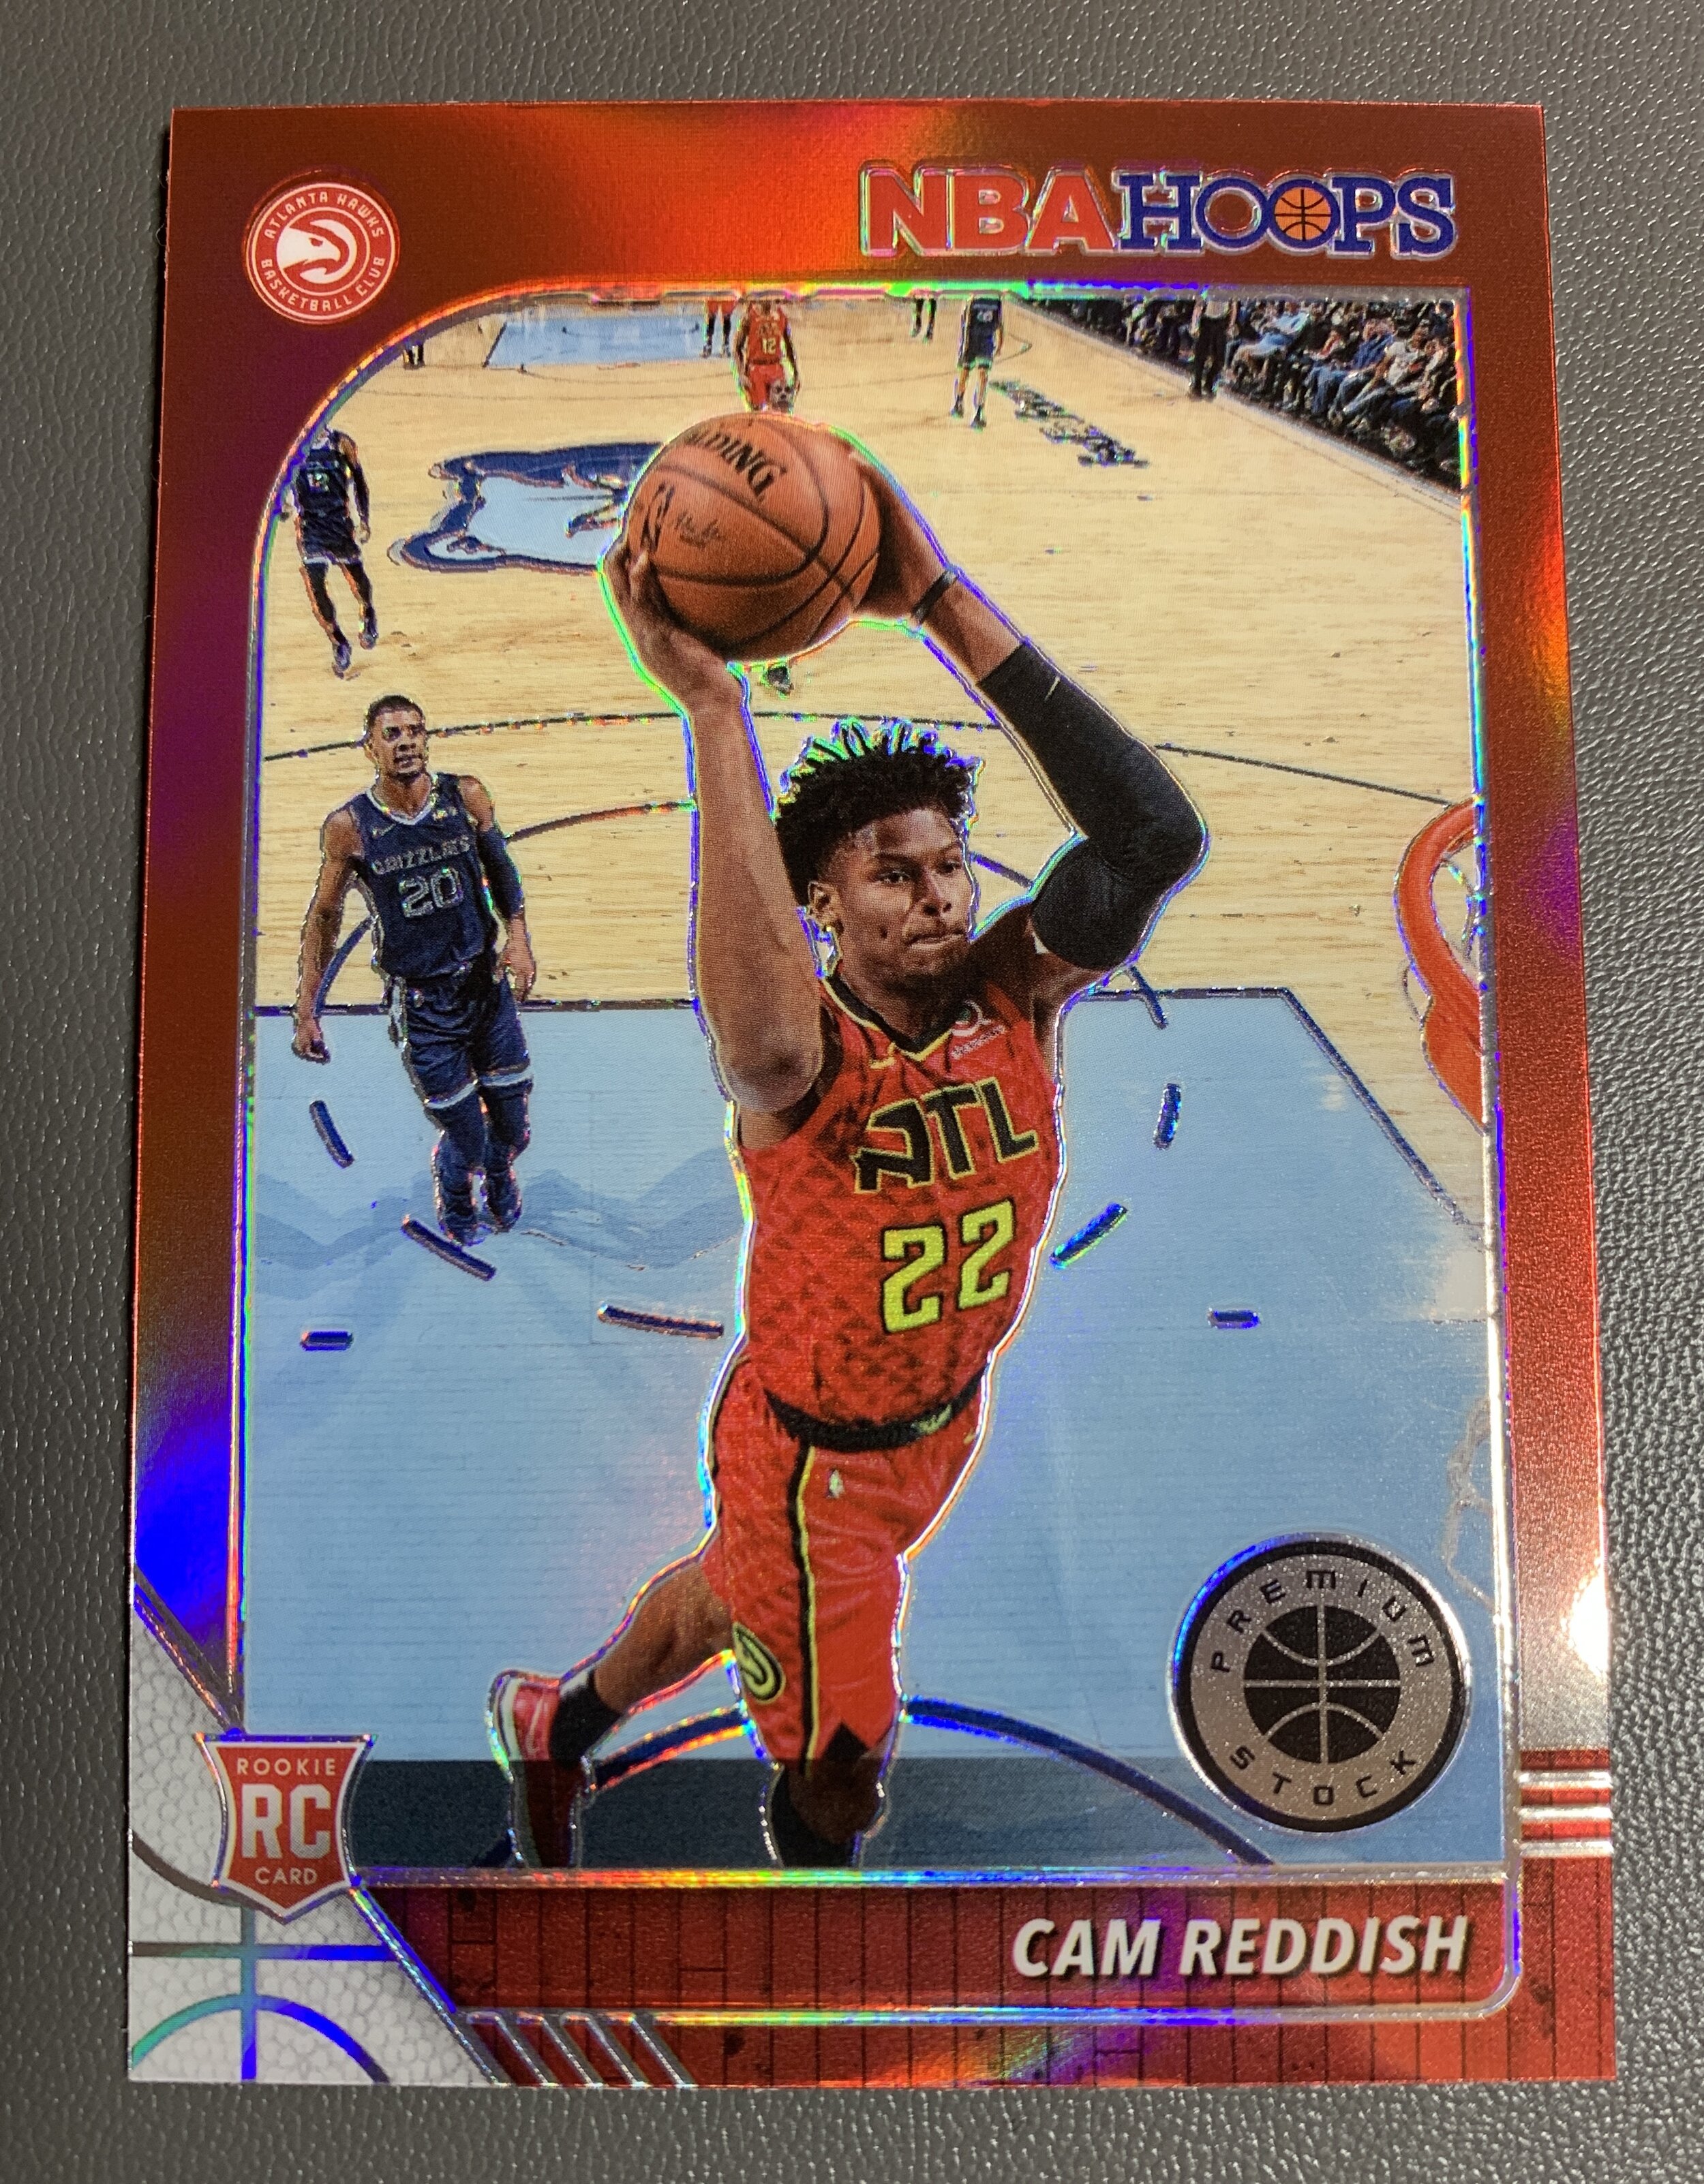 Great jersey color matching Cam Reddish Prizm rookie card with in-game monster slam photo.